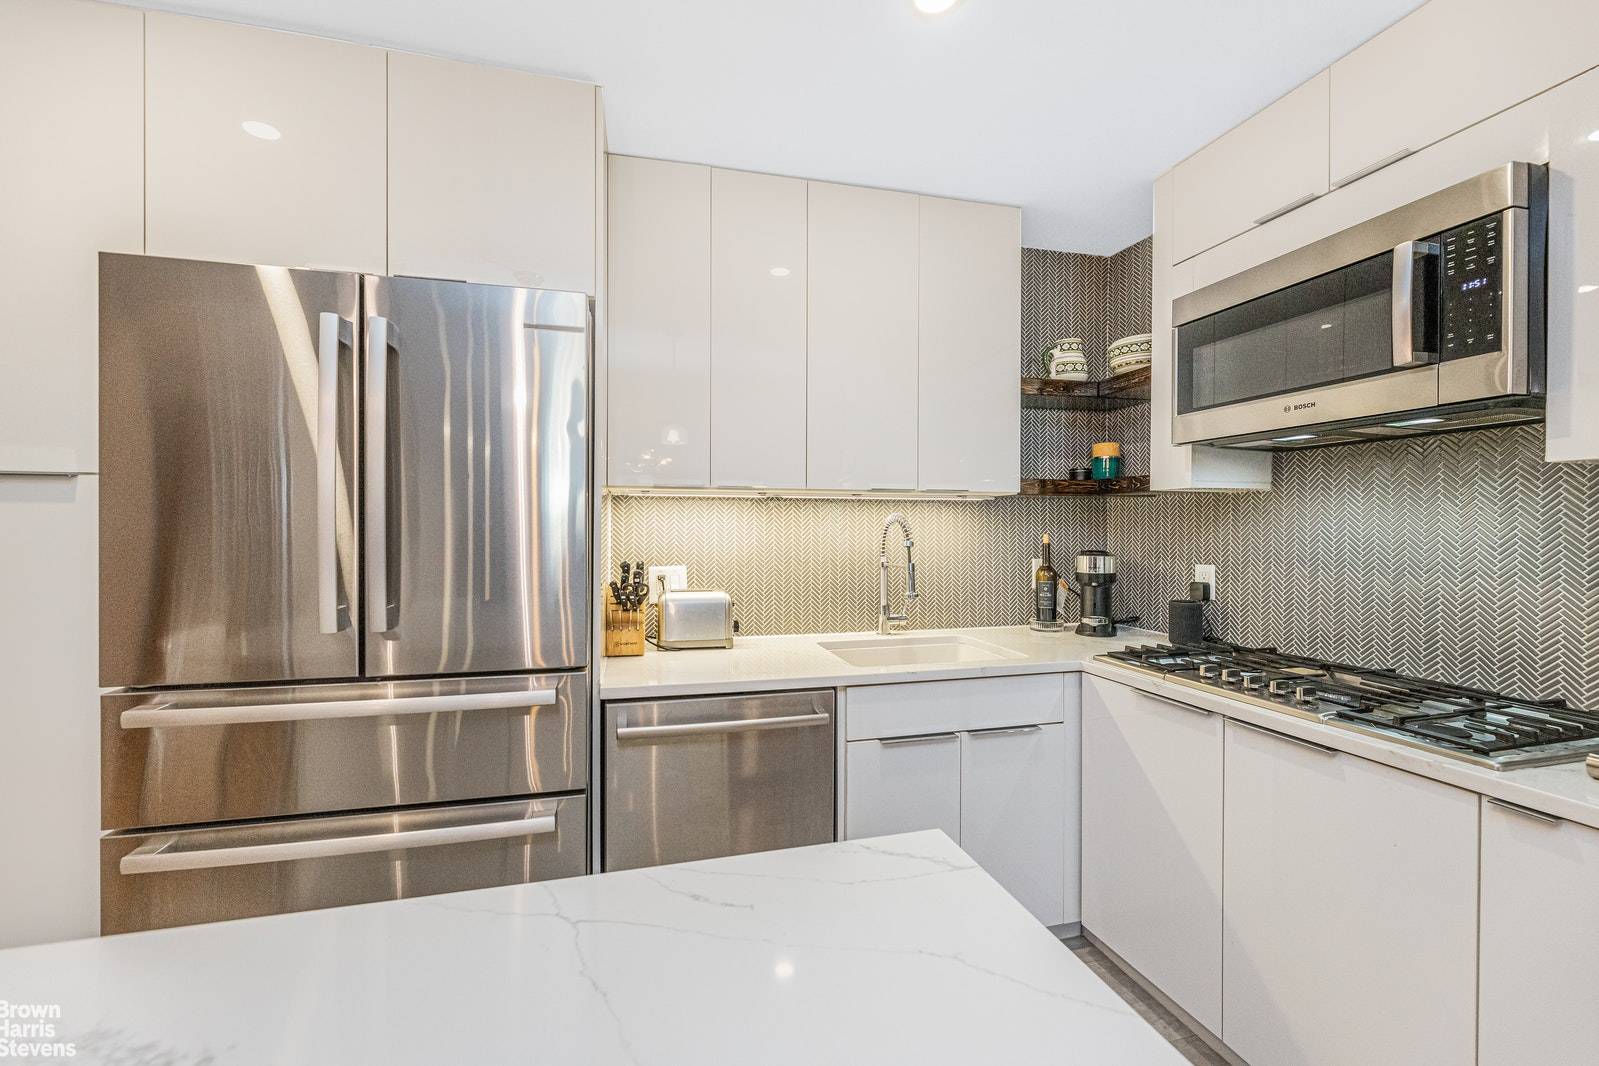 Bright, spacious, and airy, this four bedroom, two bath apartment is newly renovated, offering a variety of attractive upgrades and a tasteful design that is both contemporary and timeless.